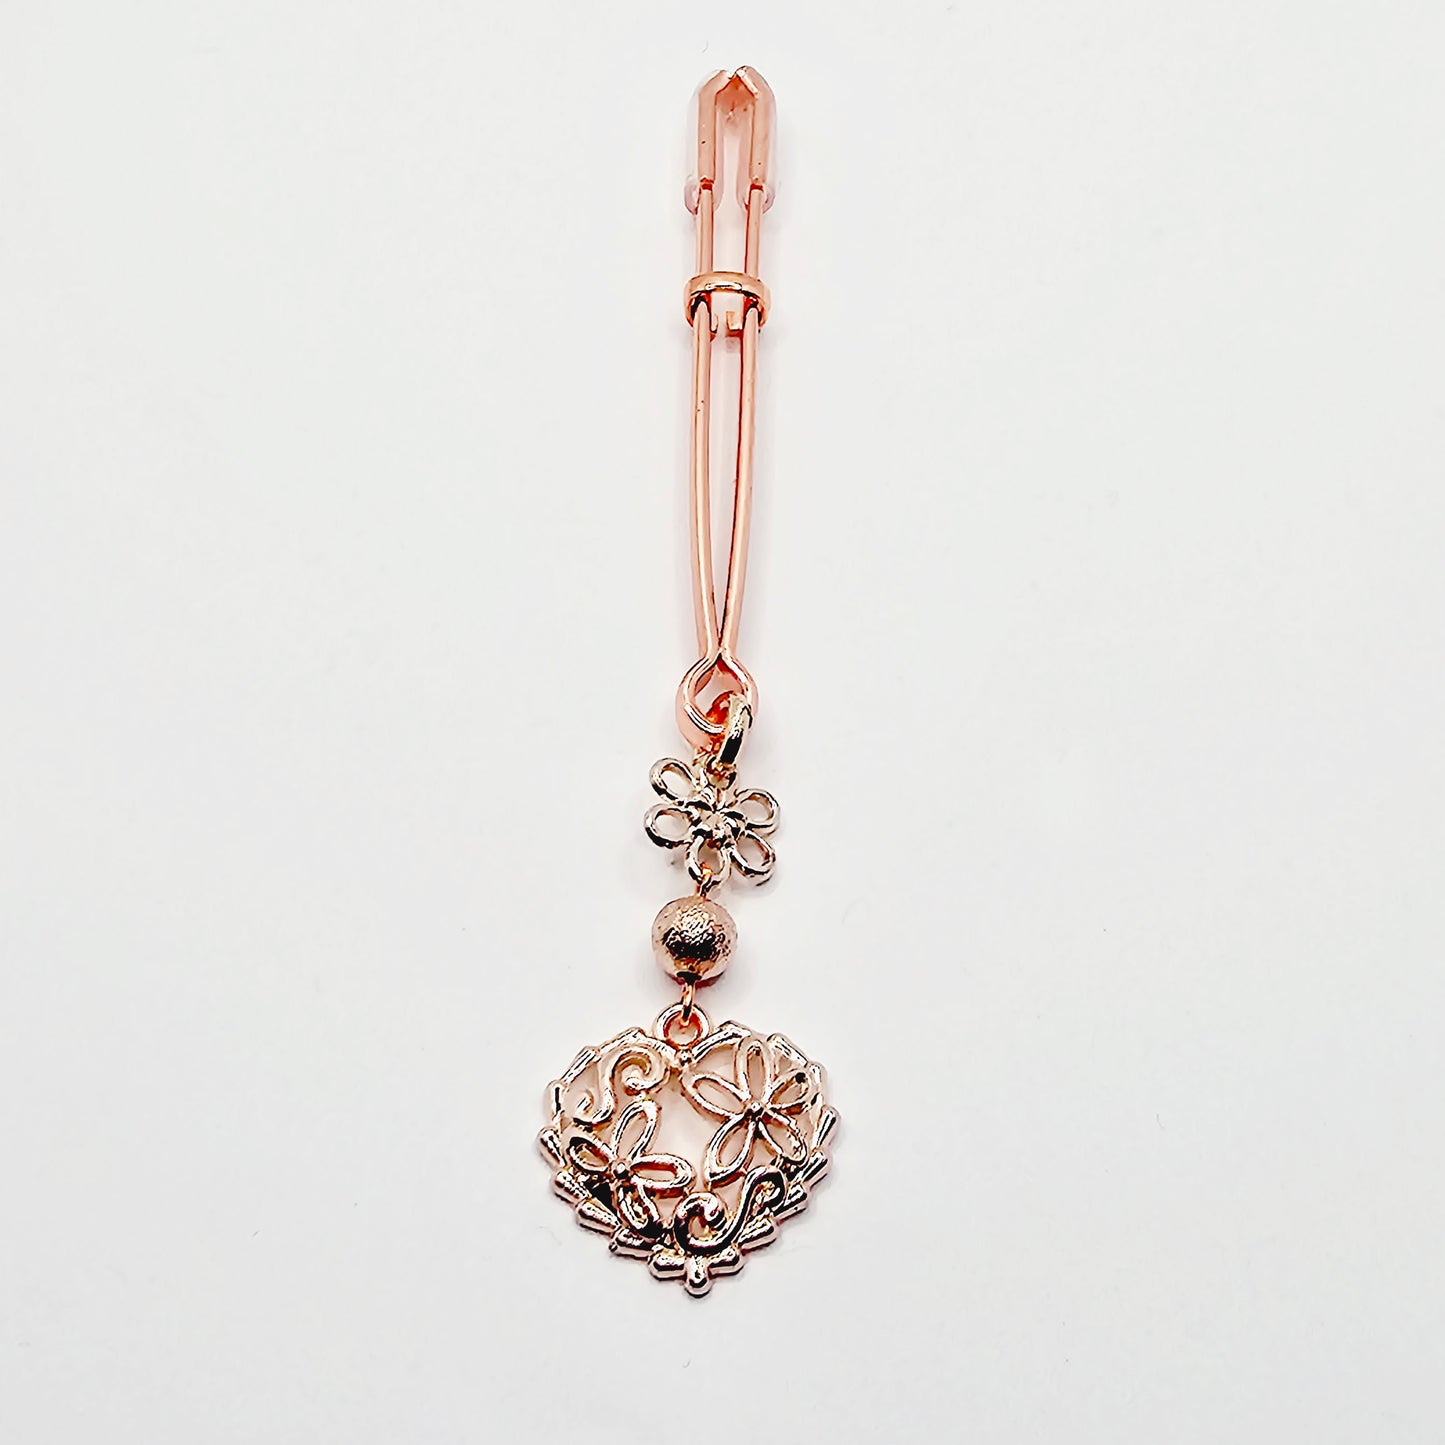 Rose Gold Clit Clamp. Tweezer Clitoral Clamp with Flowers and Heart